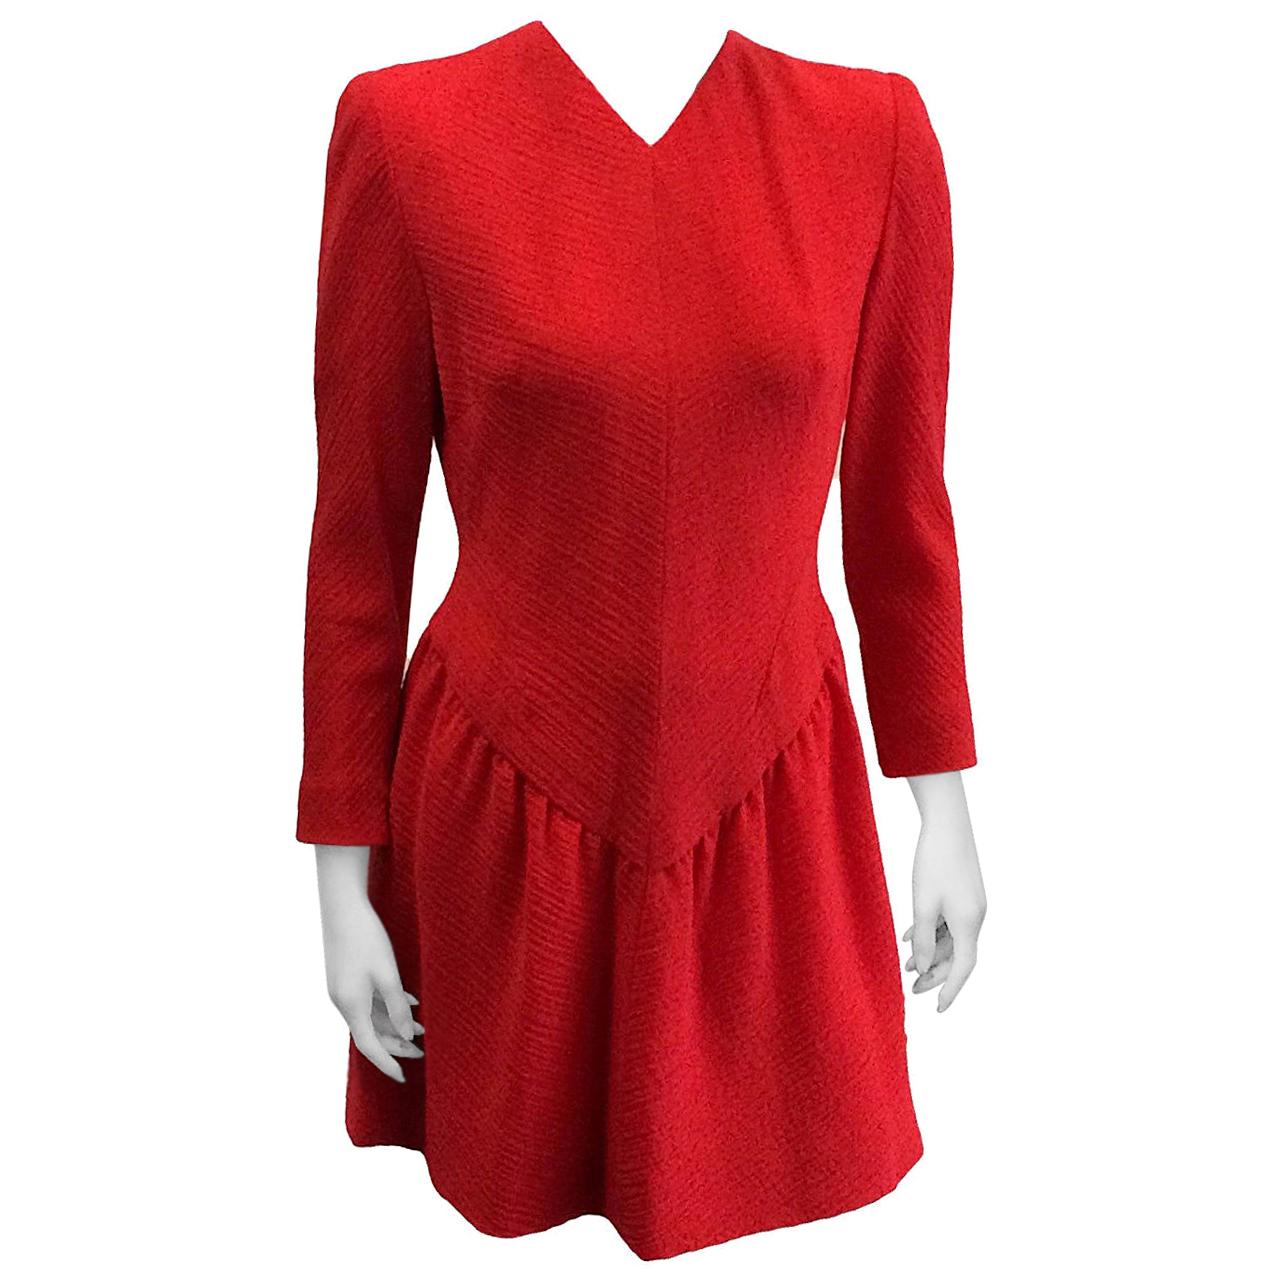 Pauline Trigere for Bergdorf Goodman 1980s Red Wool Dress Size 6. For Sale